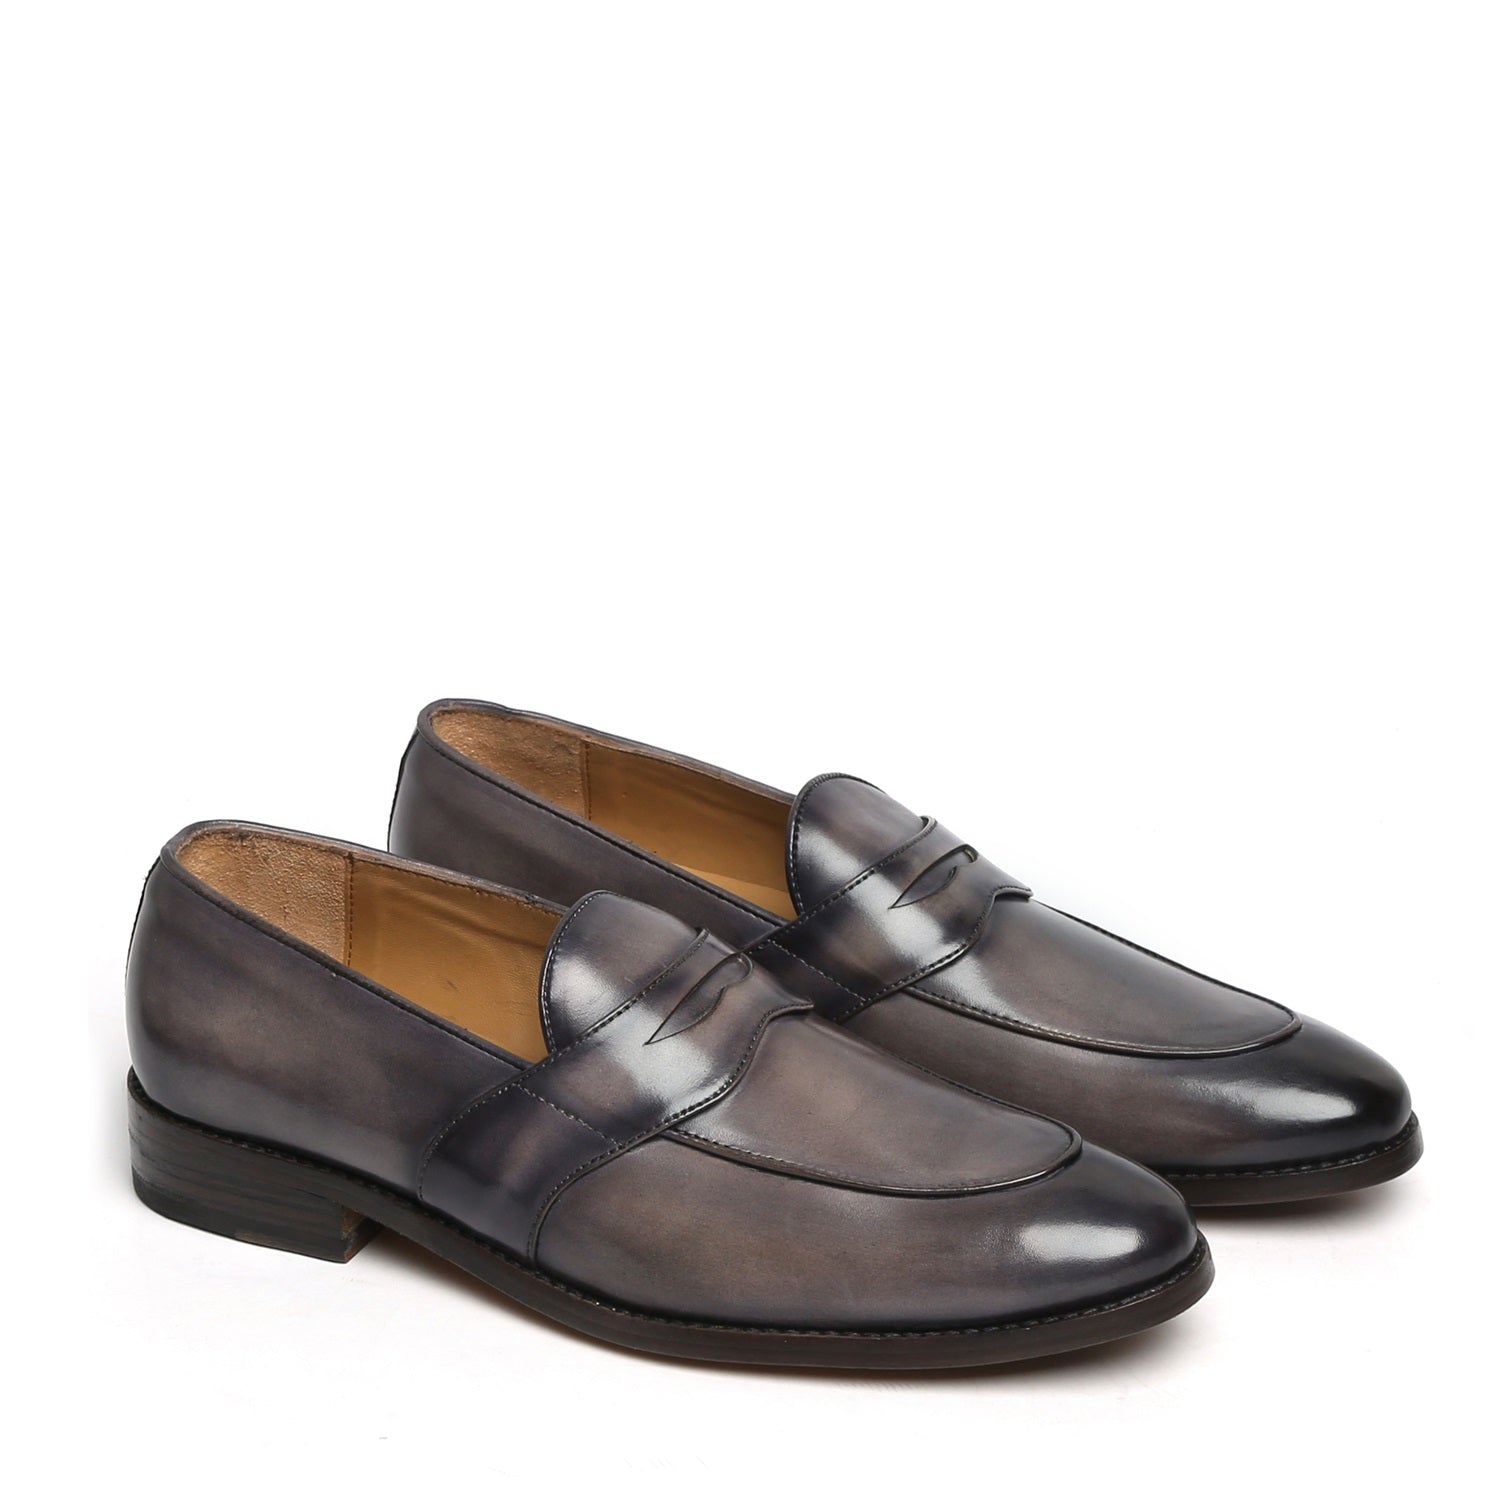 Smokey Grey Rounded Toe Loafers